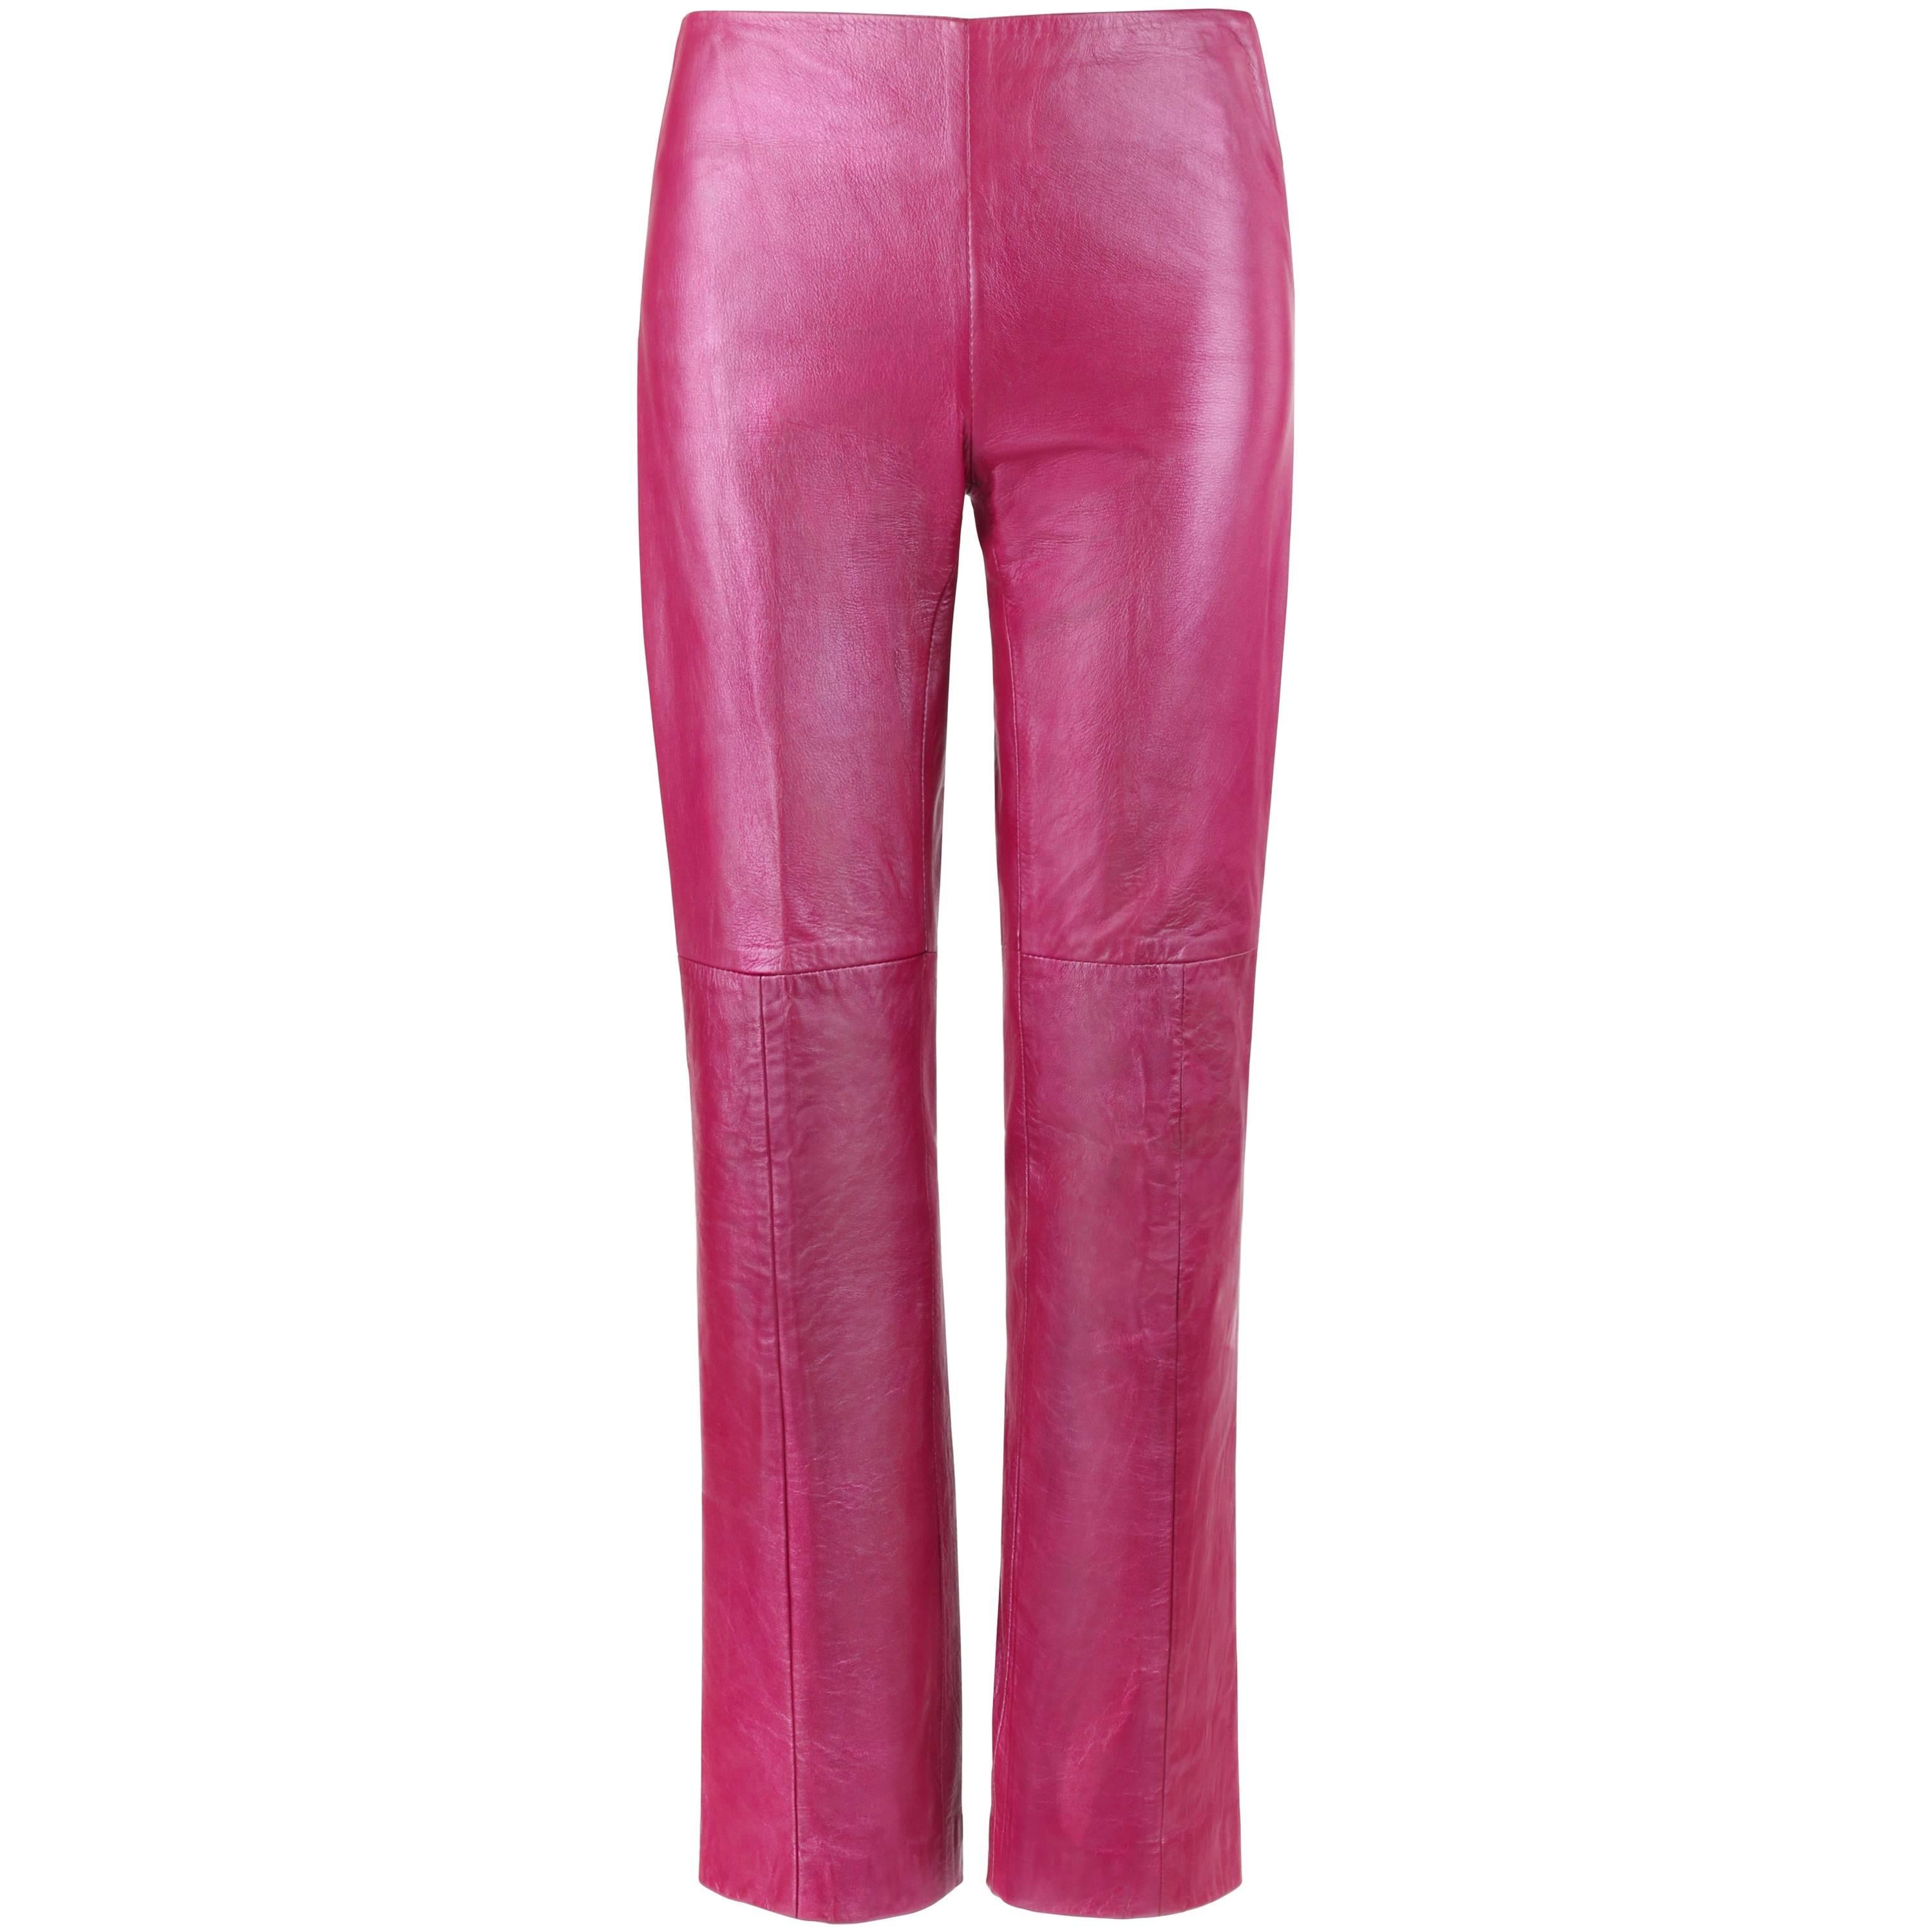 VERSACE Jeans Couture Magenta Pink Leather Boot Cut Pants